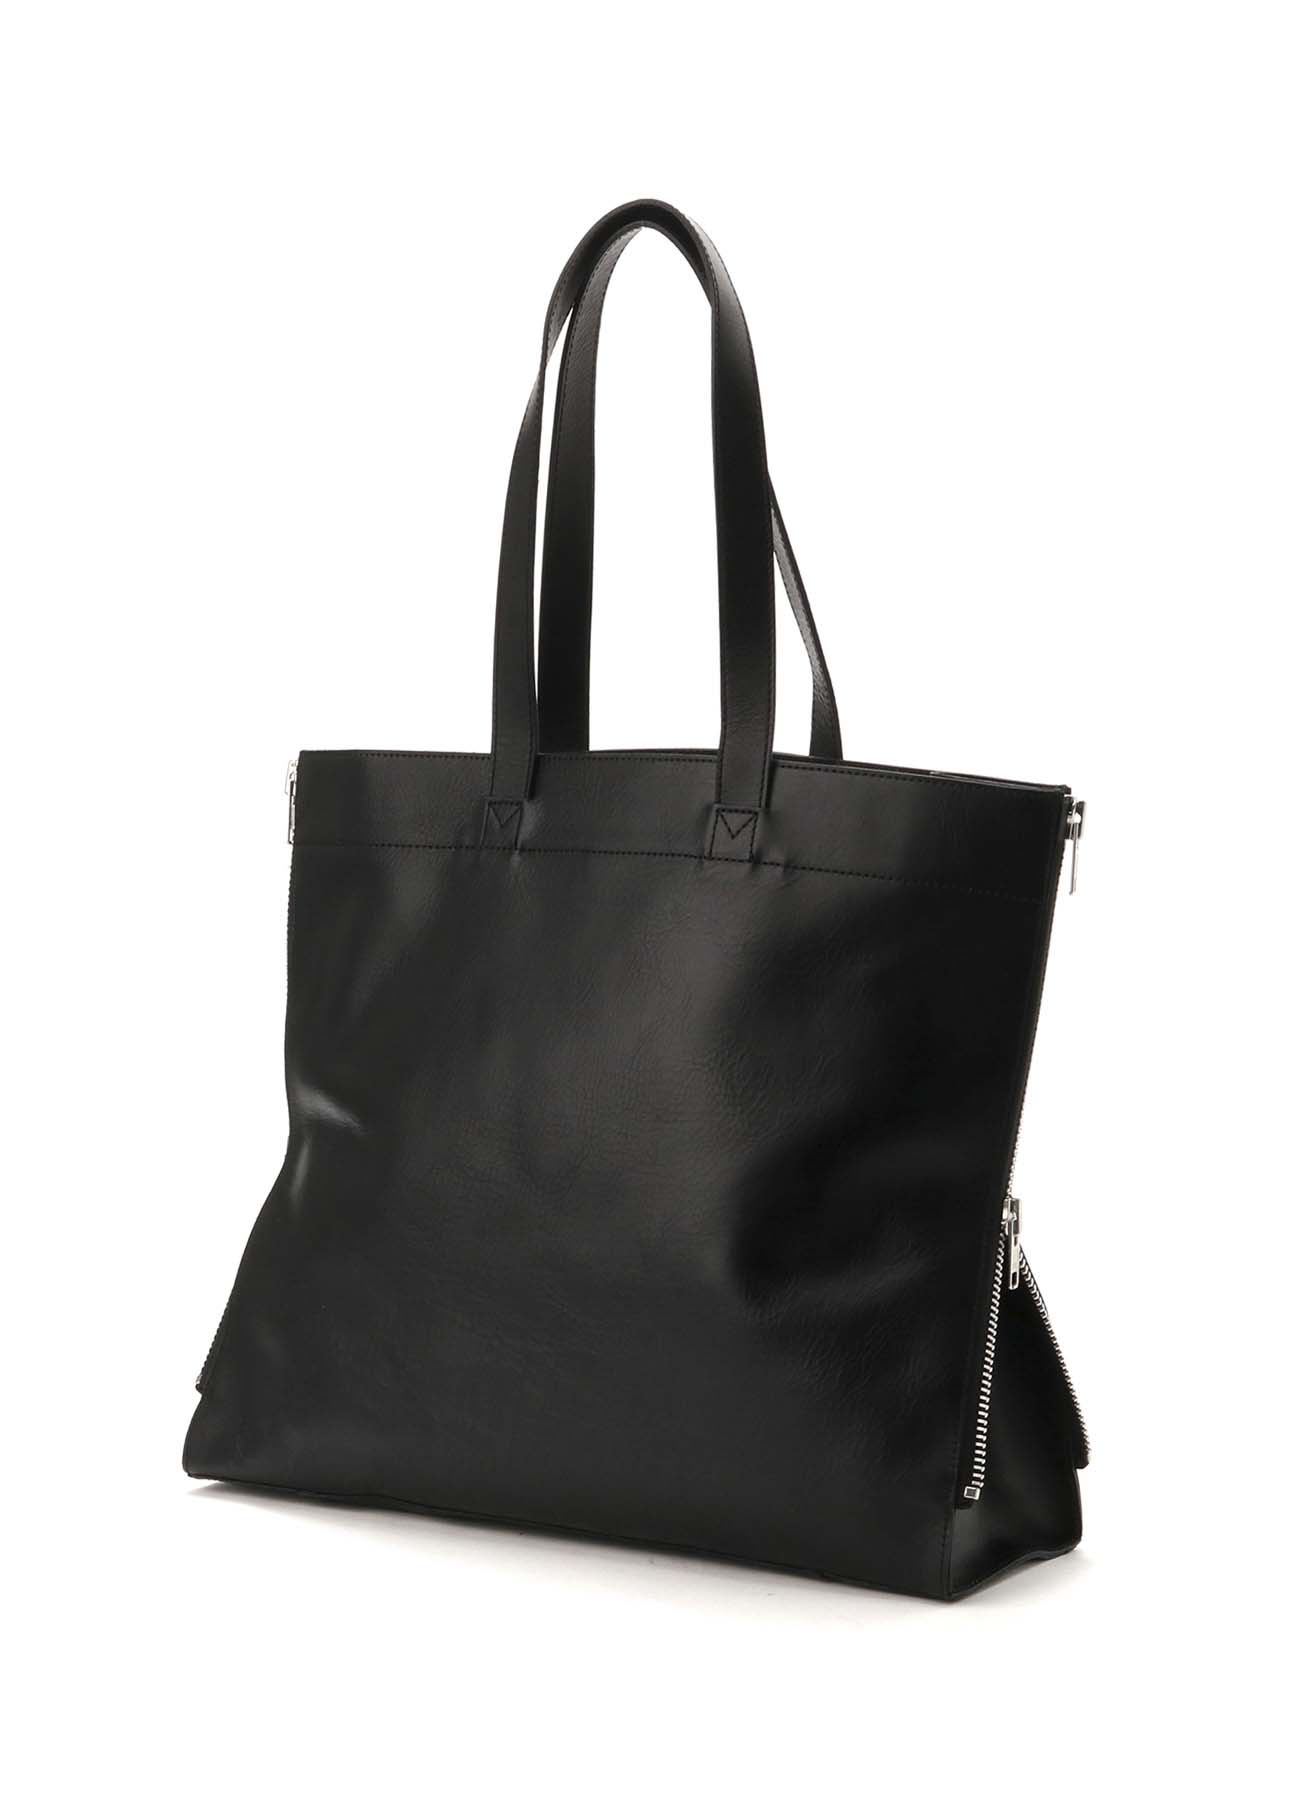 PULL UP LEATHER TOTE BAG